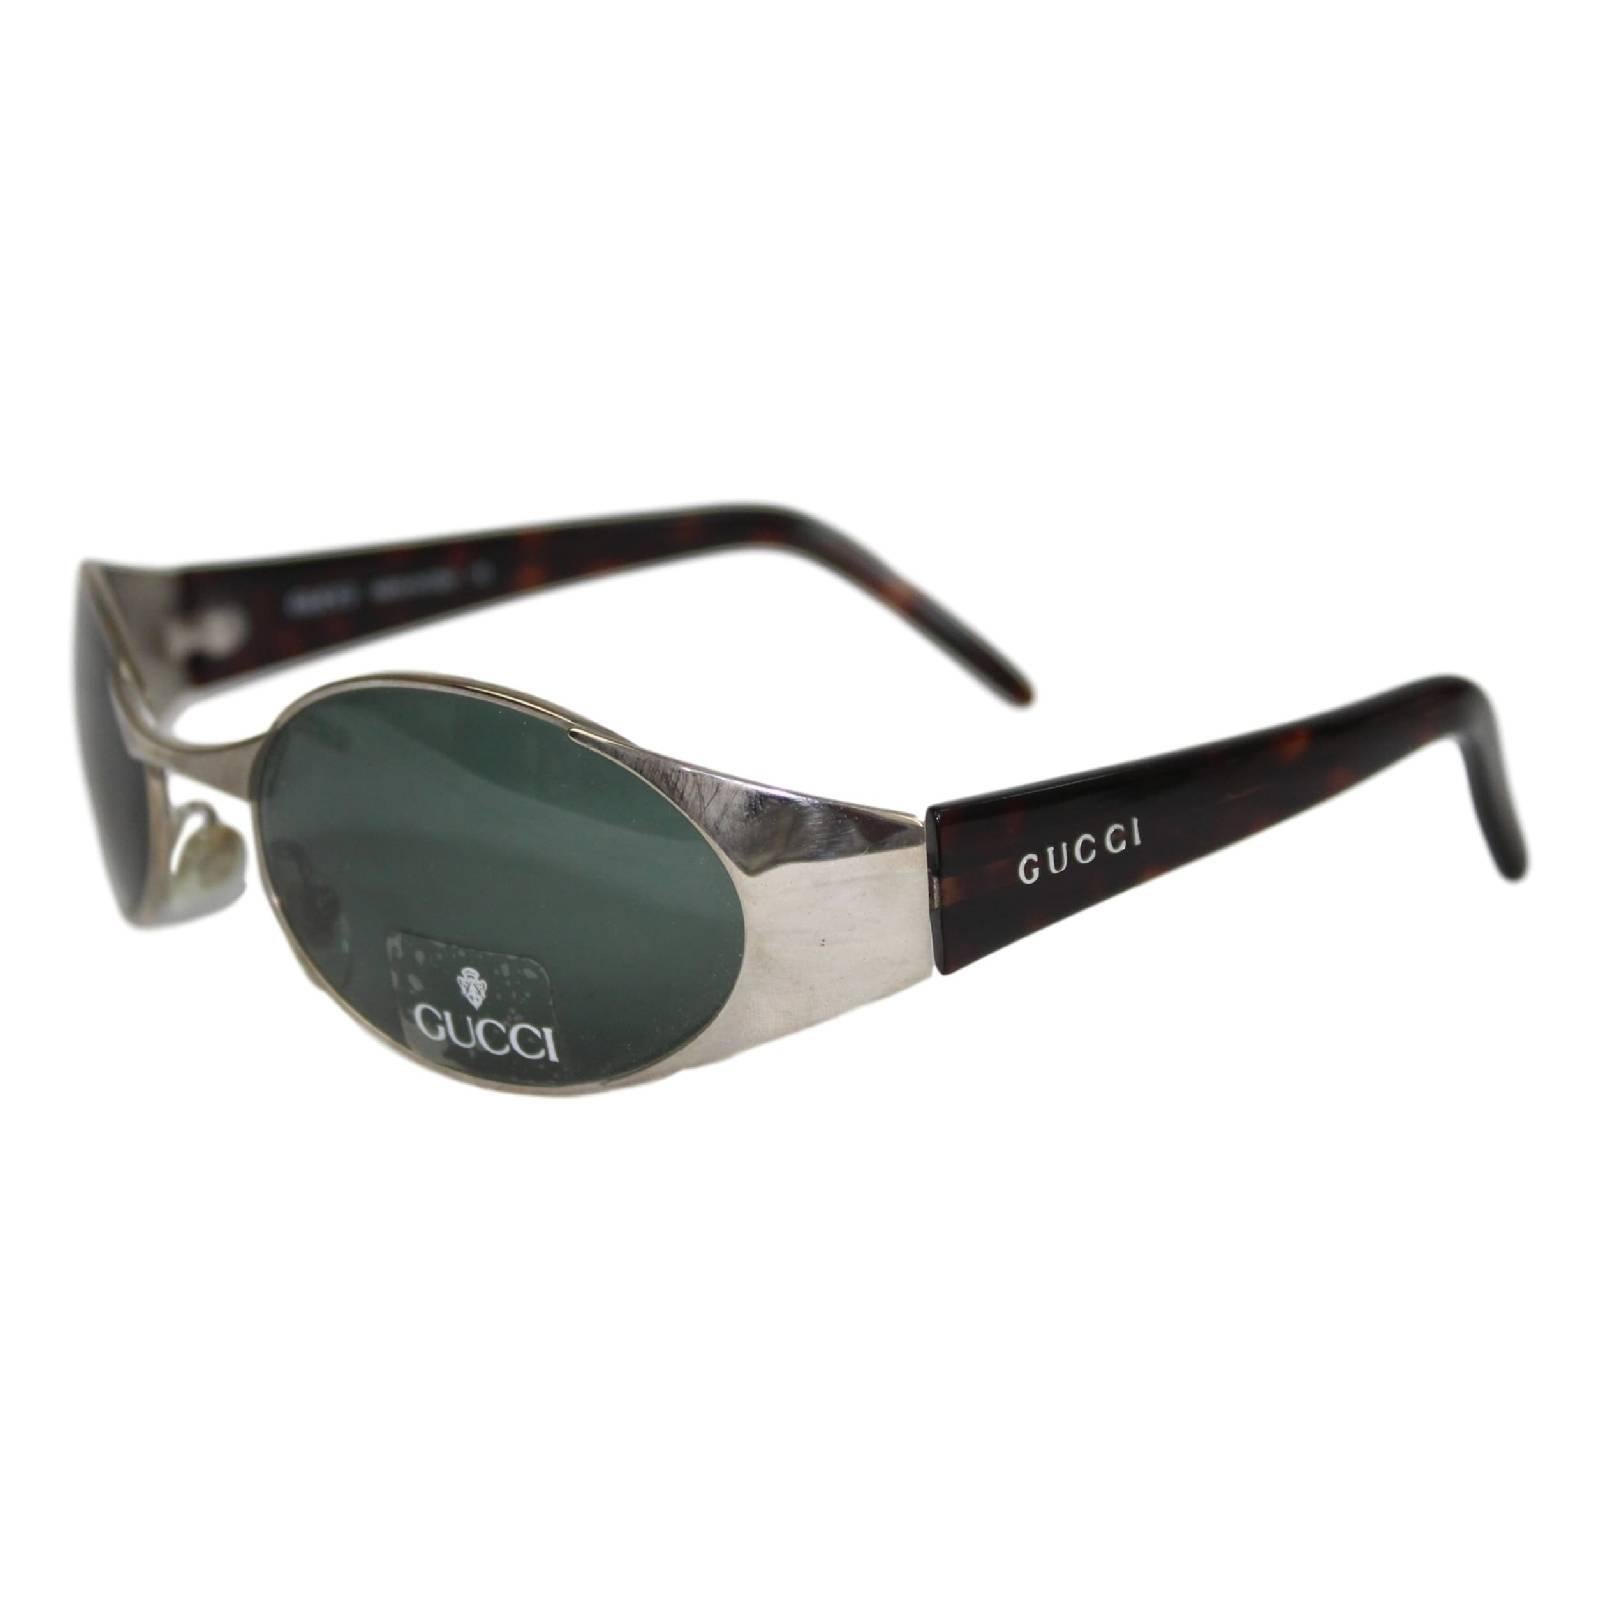 Gucci vintage sunglasses GG2378/S tortoise and green bone metal silver